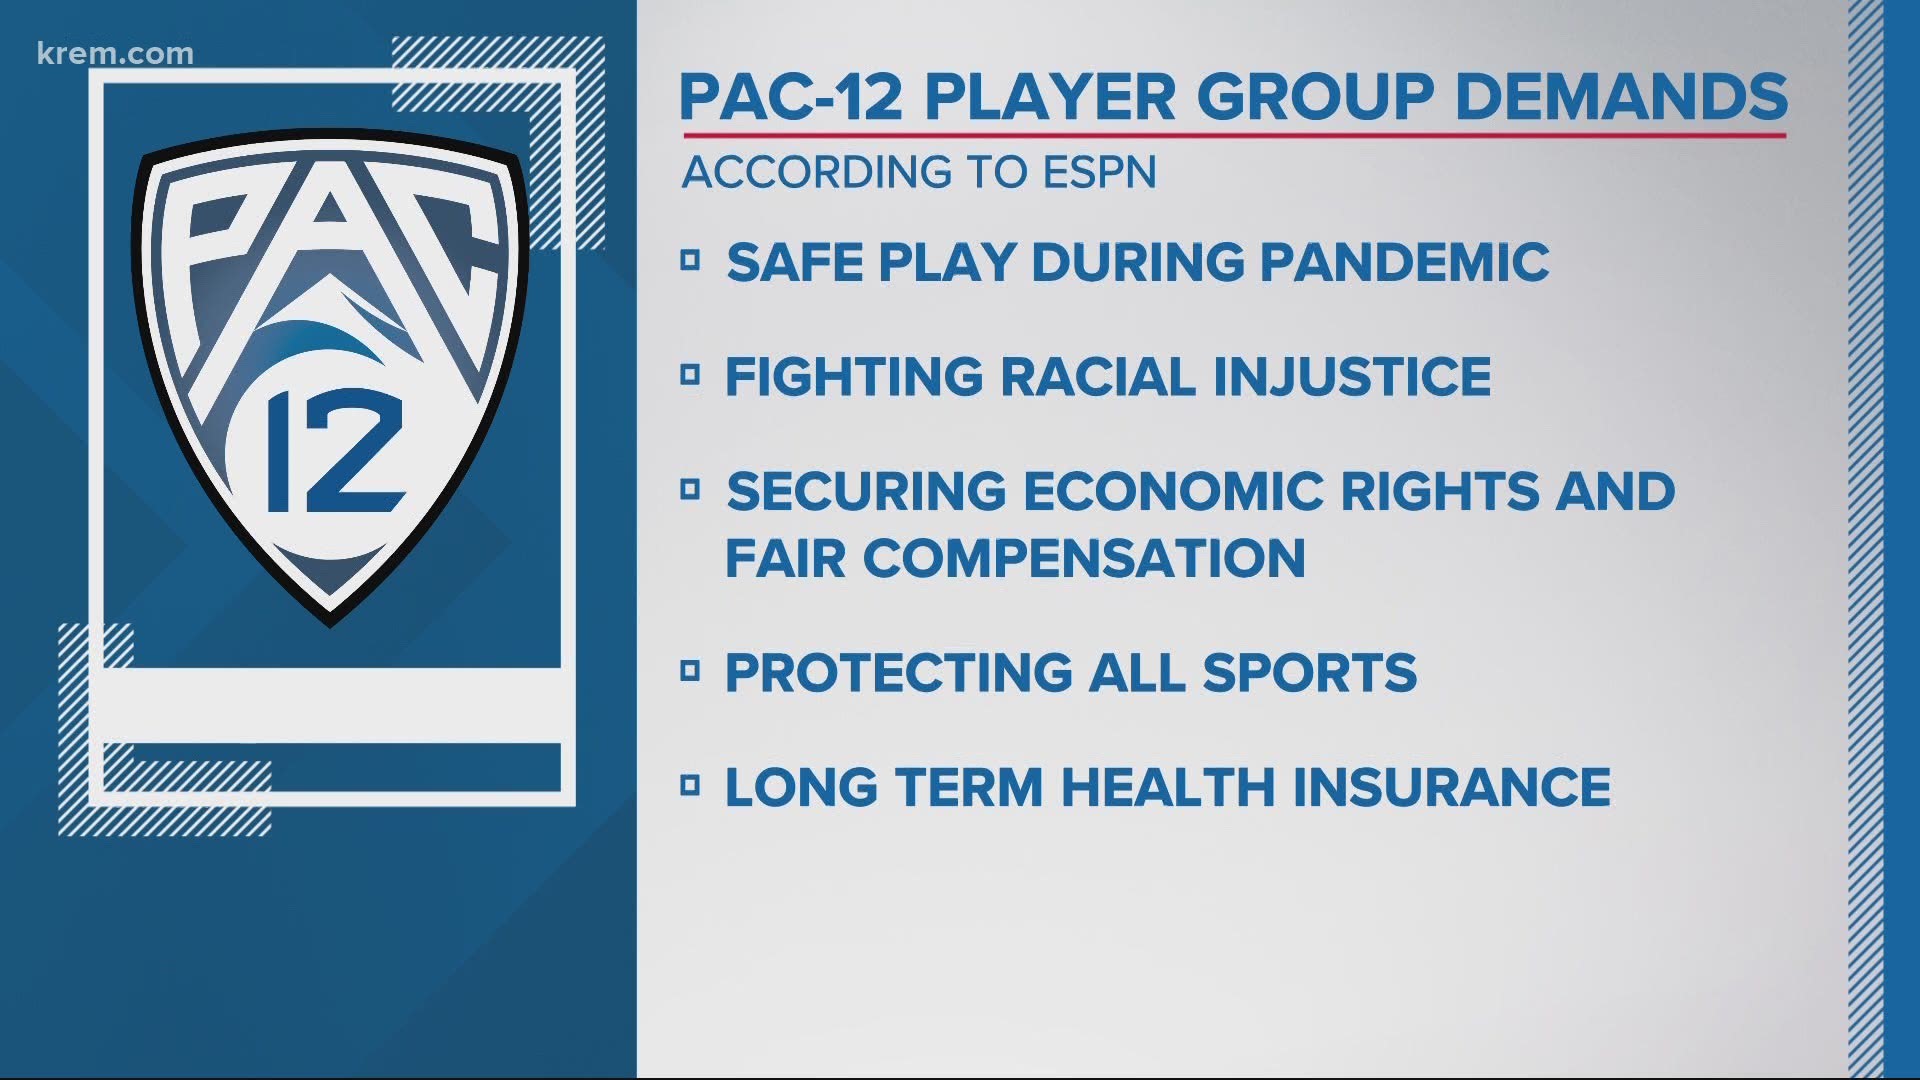 A group of Pac-12 players is threatening to opt out of this season if the conference doesn't meet their demands on injustice and safety during the pandemic.